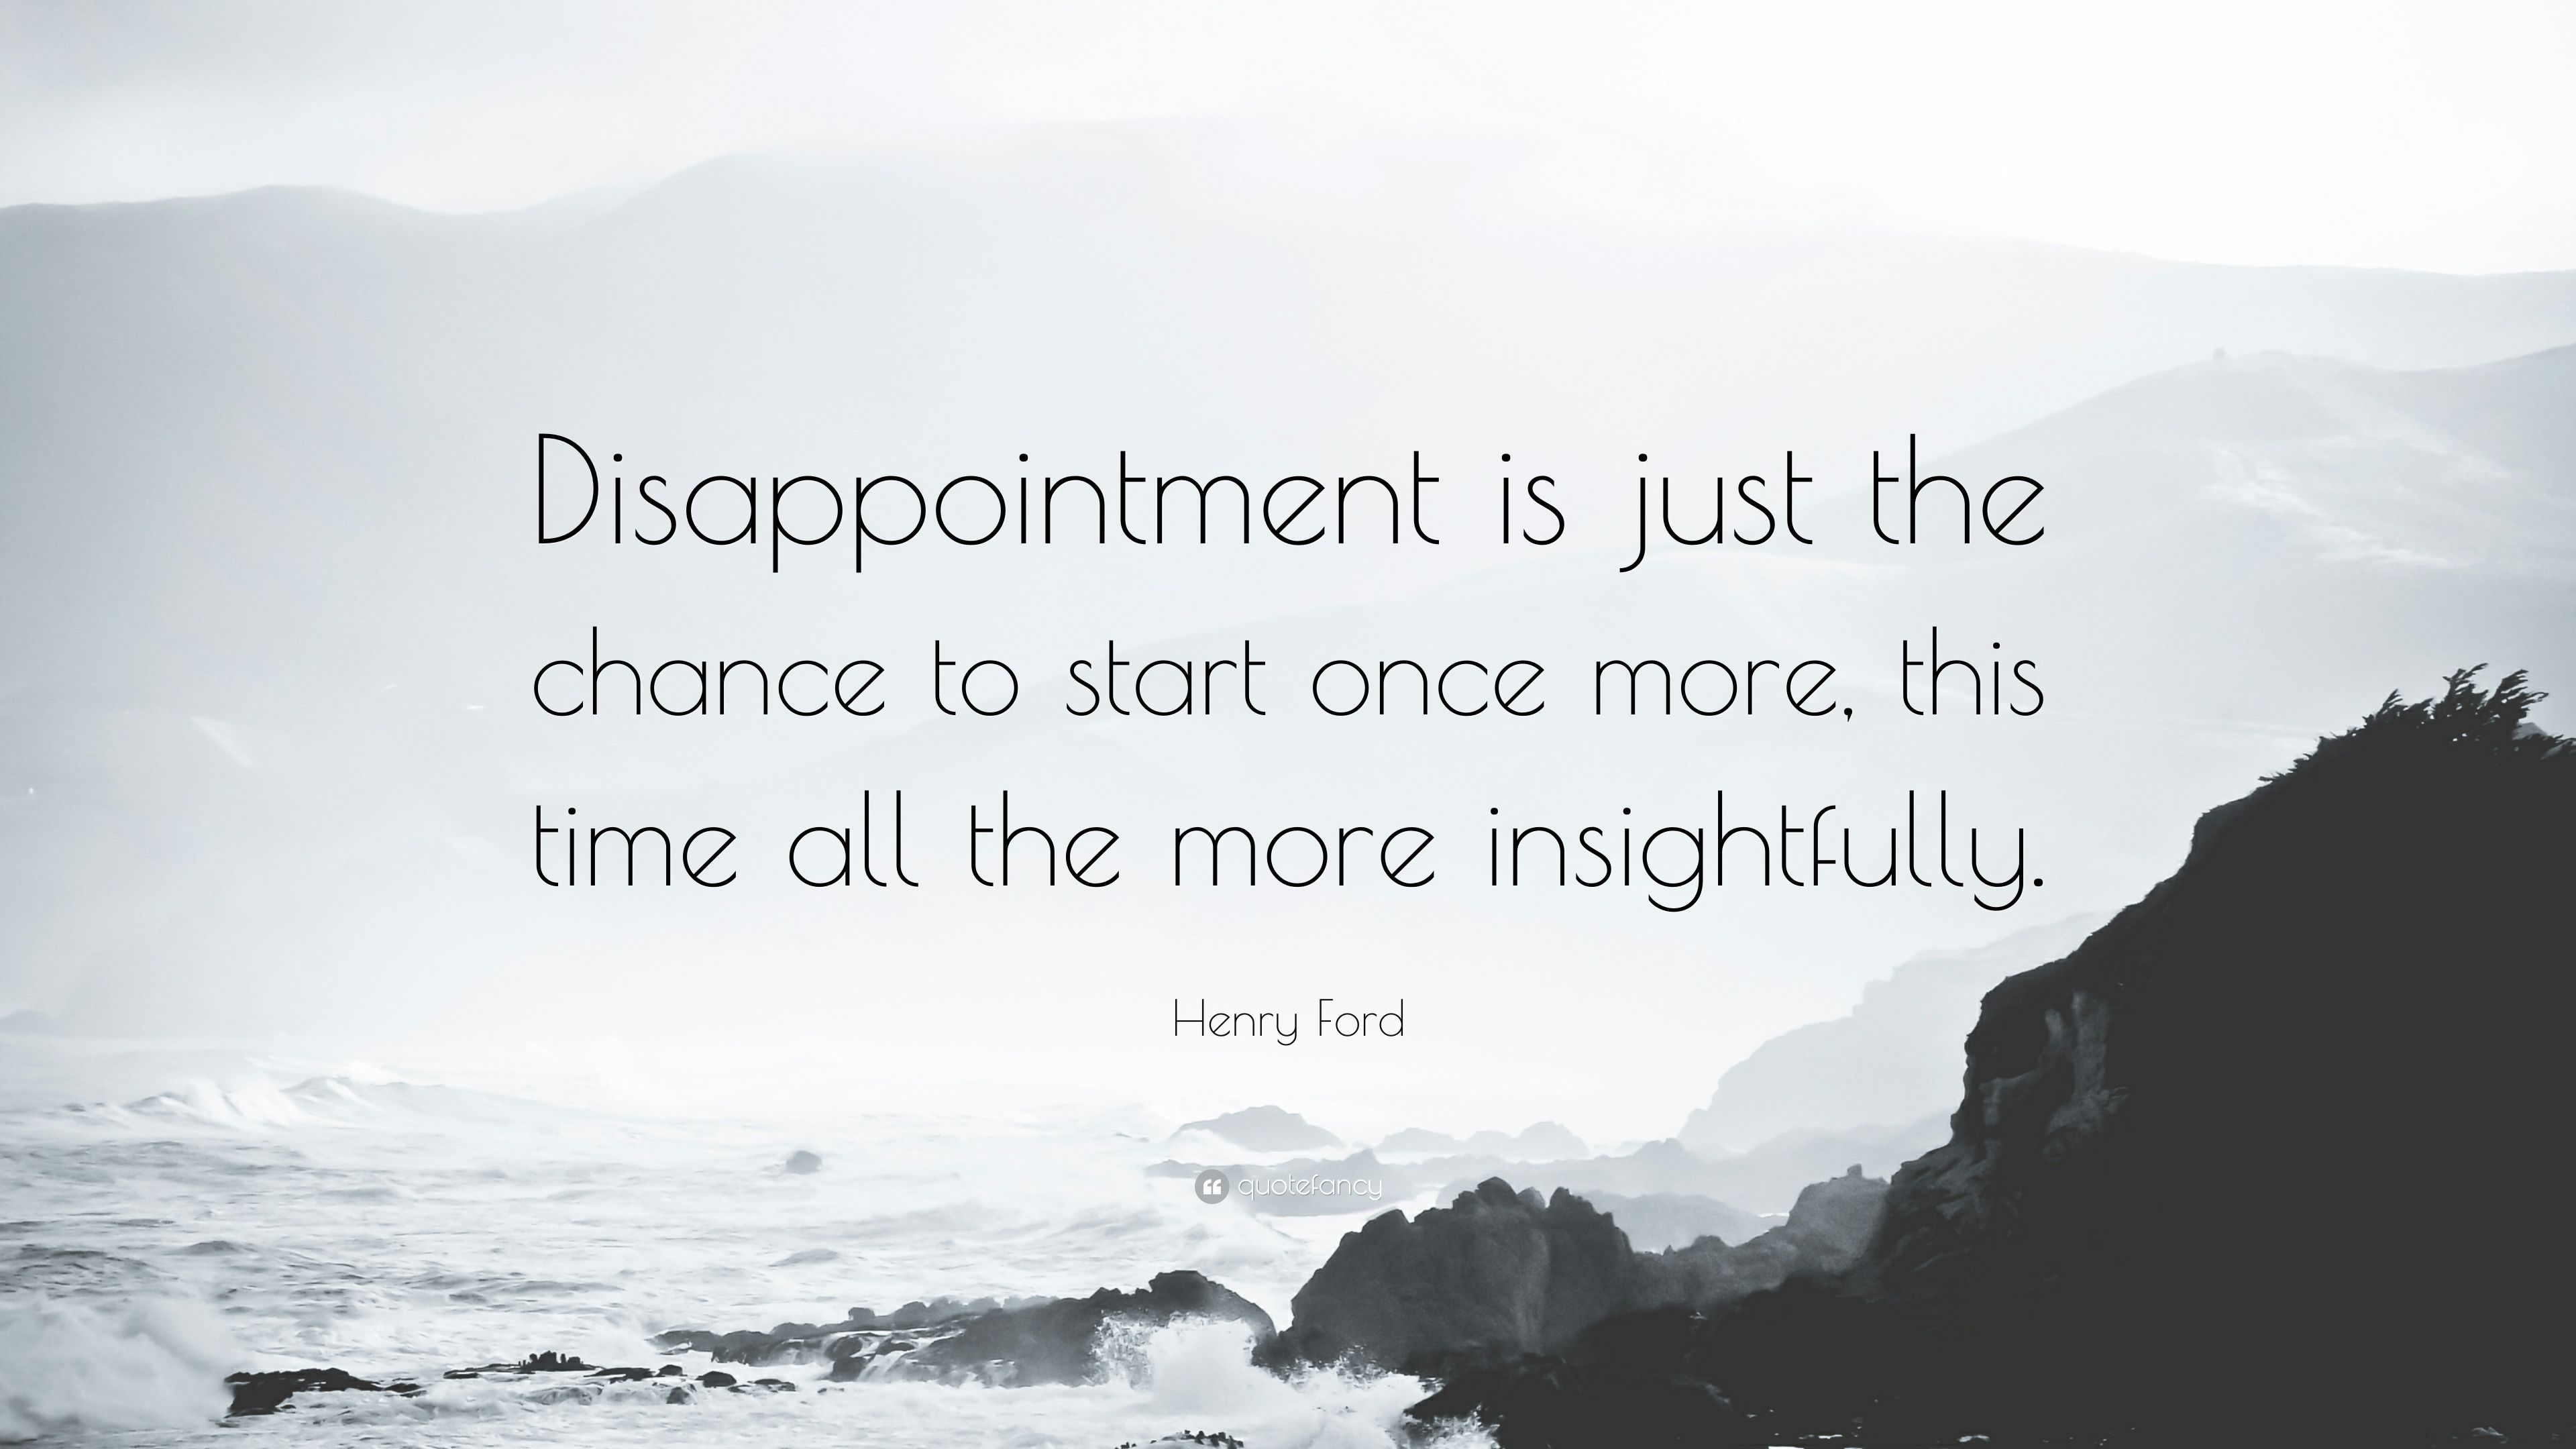 Henry Ford Quote: “Disappointment is just the chance to start once more, this time all the more insightfully.” (7 wallpaper)